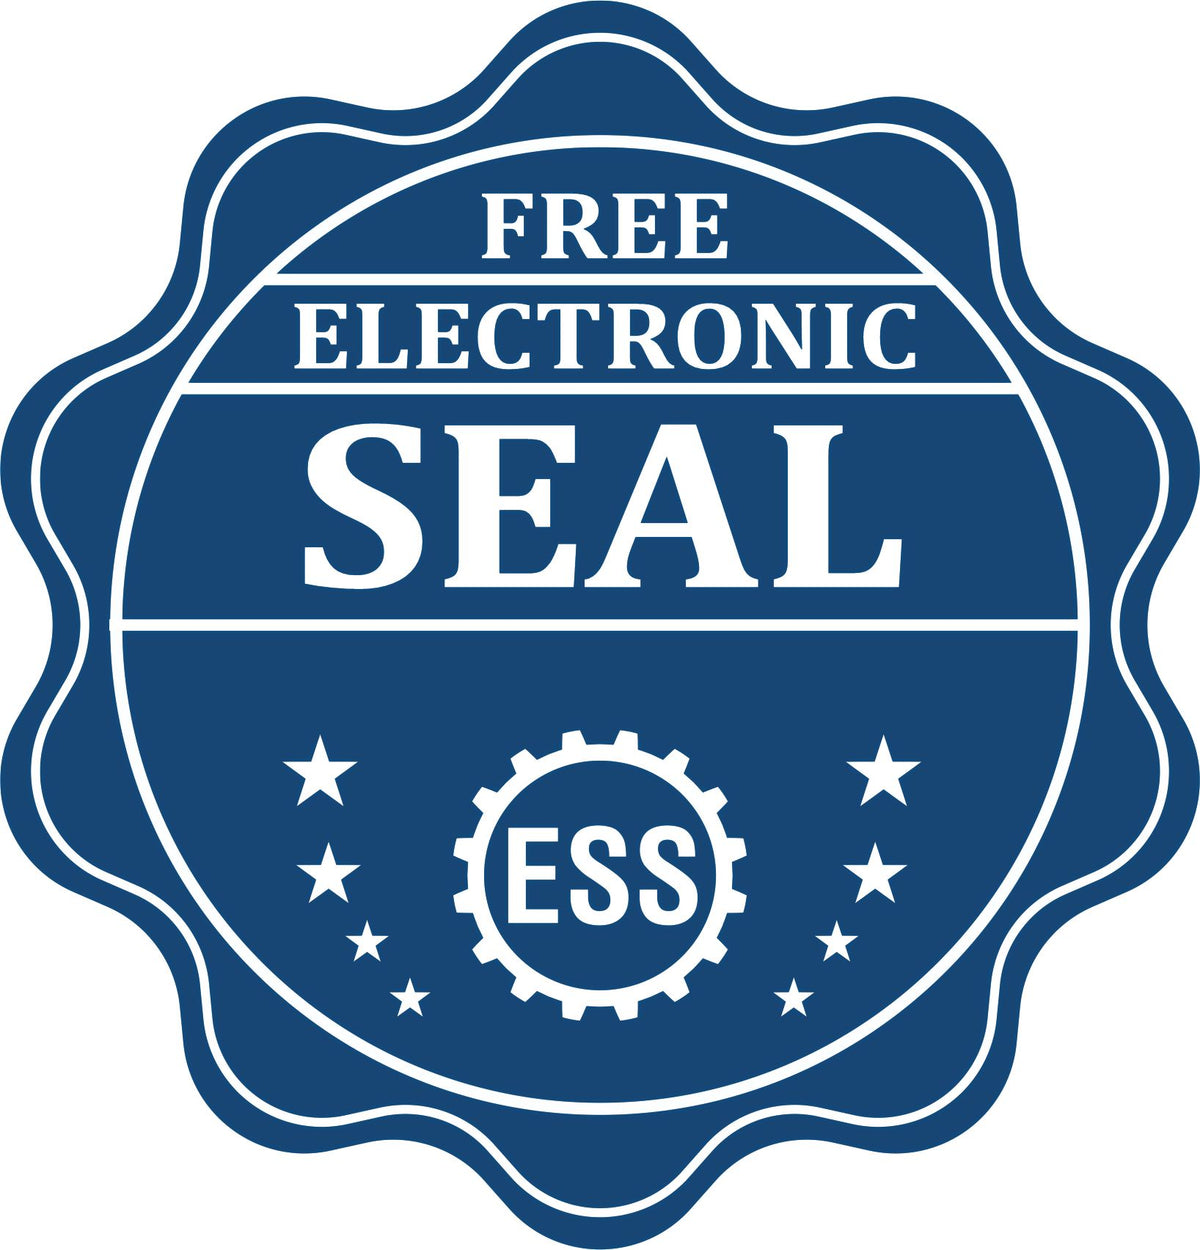 A badge showing a free electronic seal for the Super Slim Georgia Notary Public Stamp with stars and the ESS gear on the emblem.